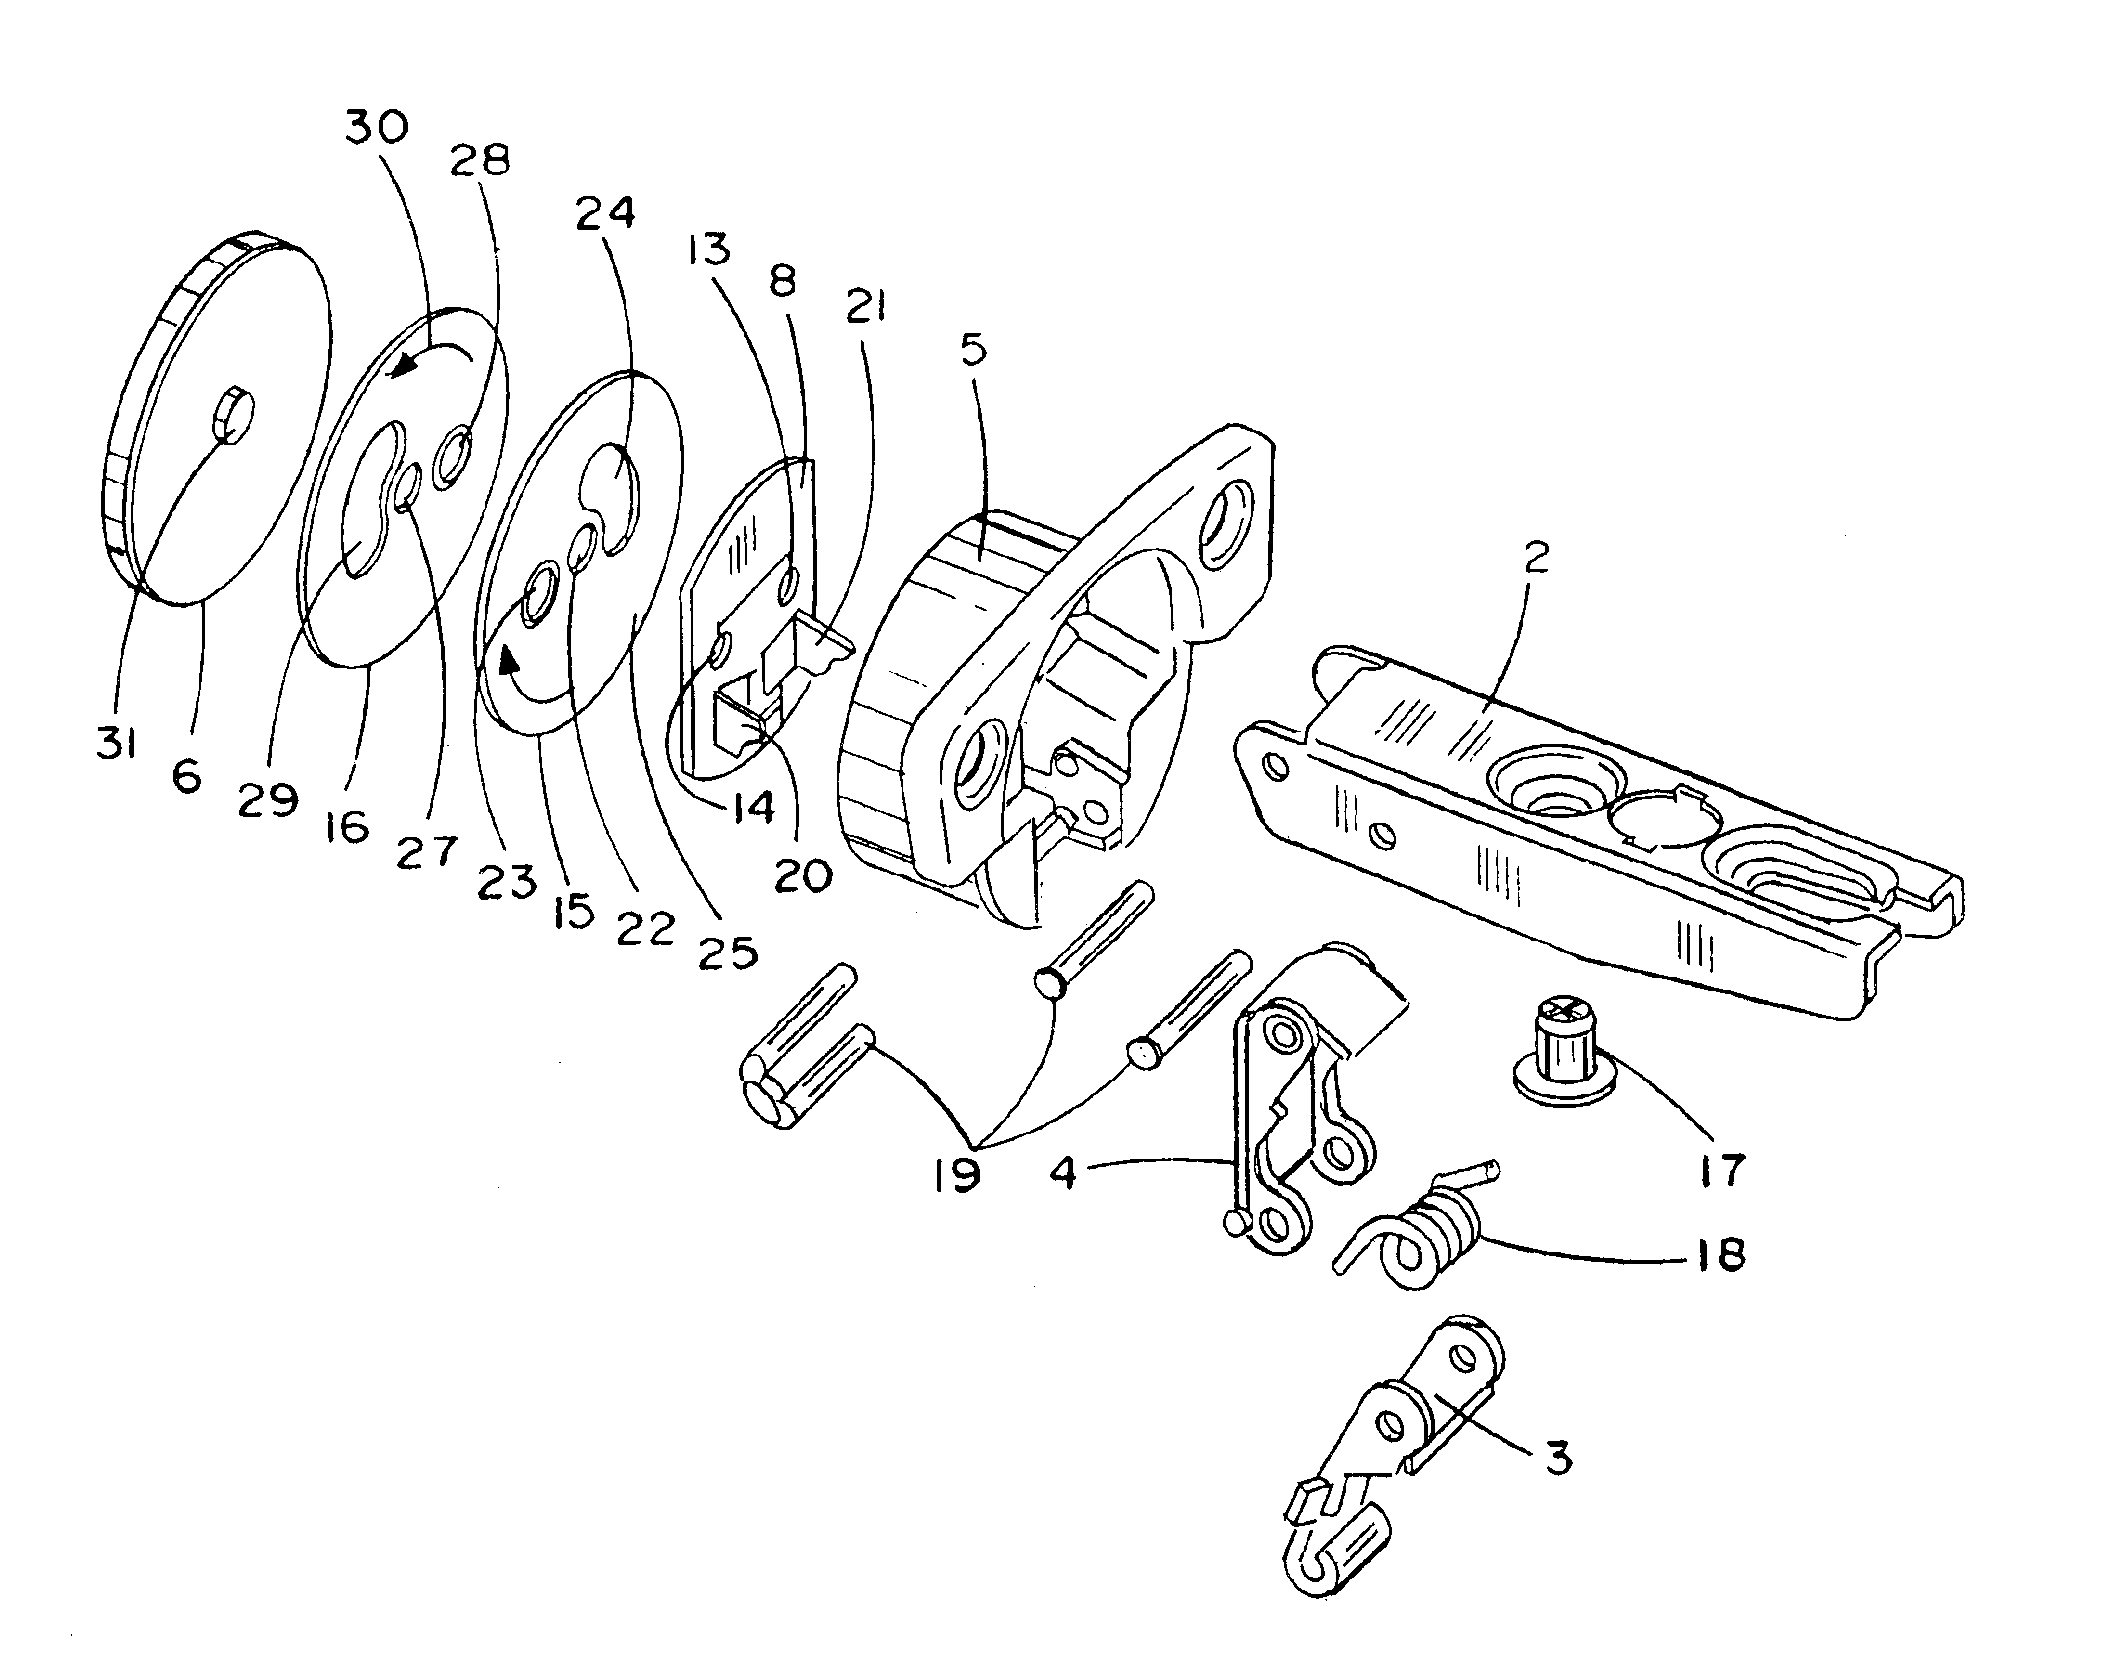 Cabinet hardware with braking and shock absorbing device